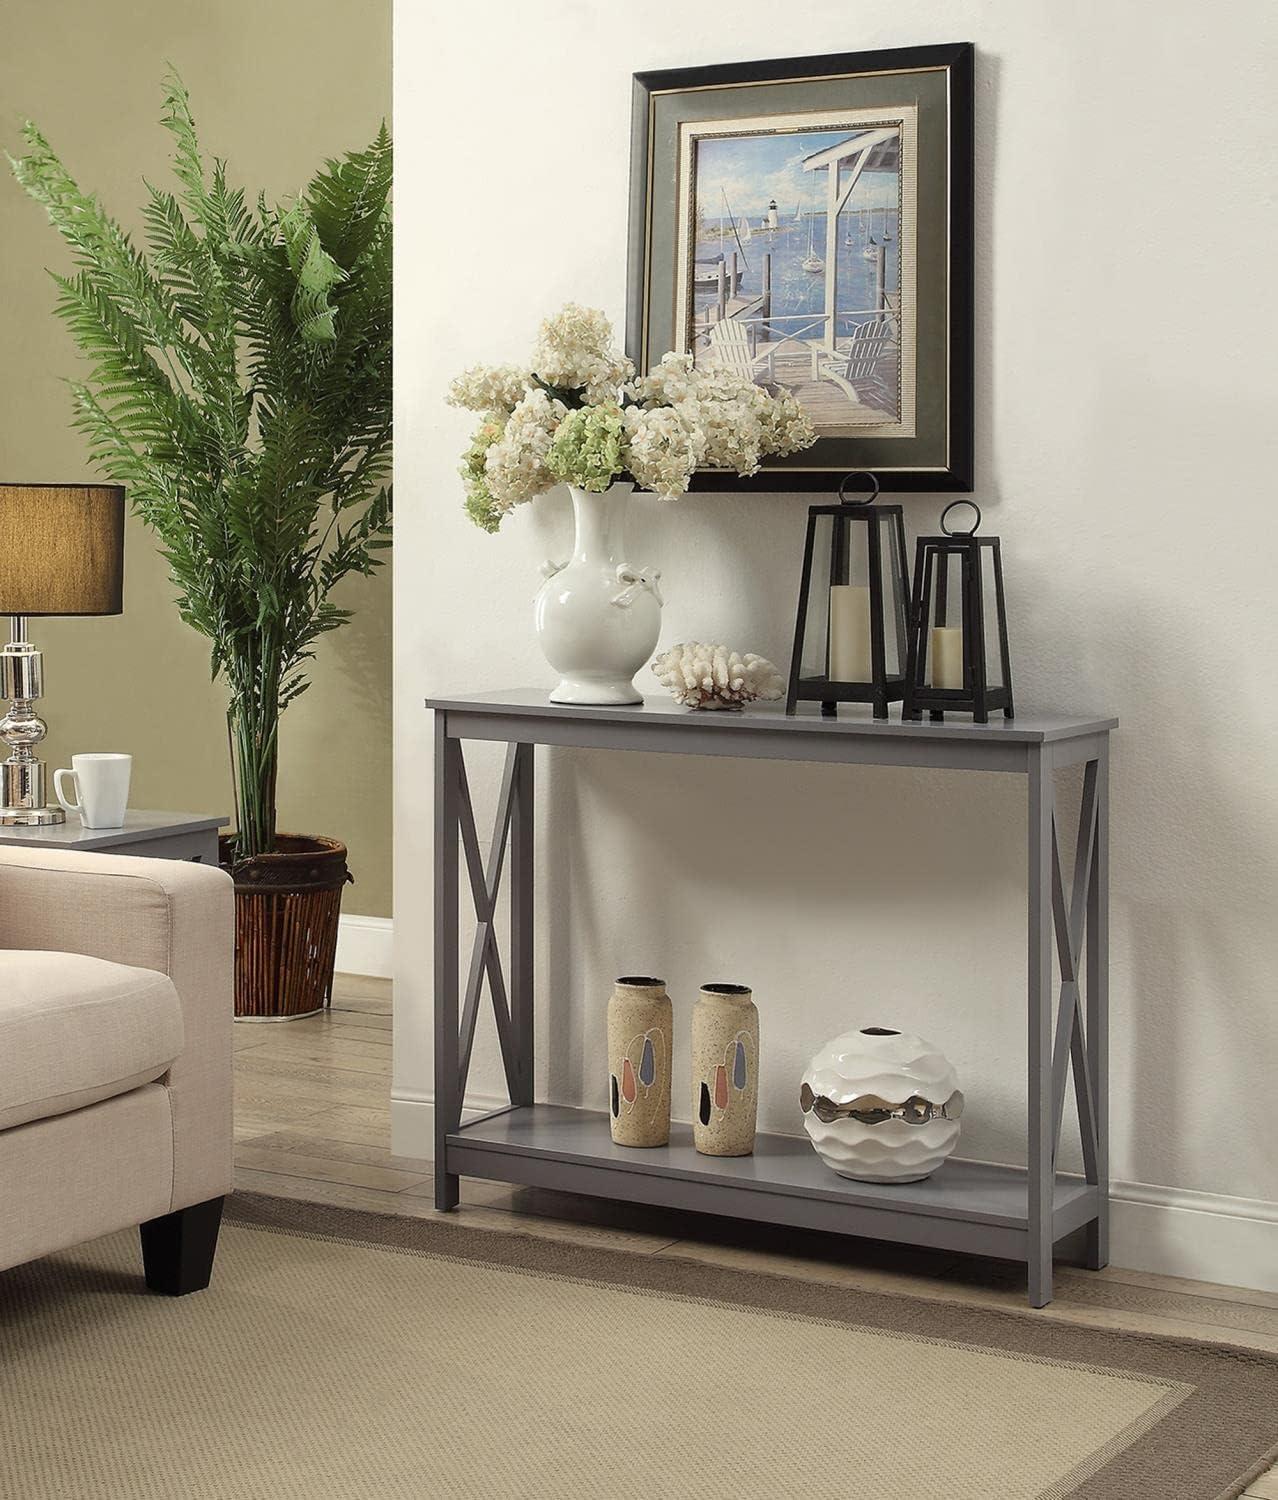 Gray Oxford 40" Wood Console Table with Storage Shelf